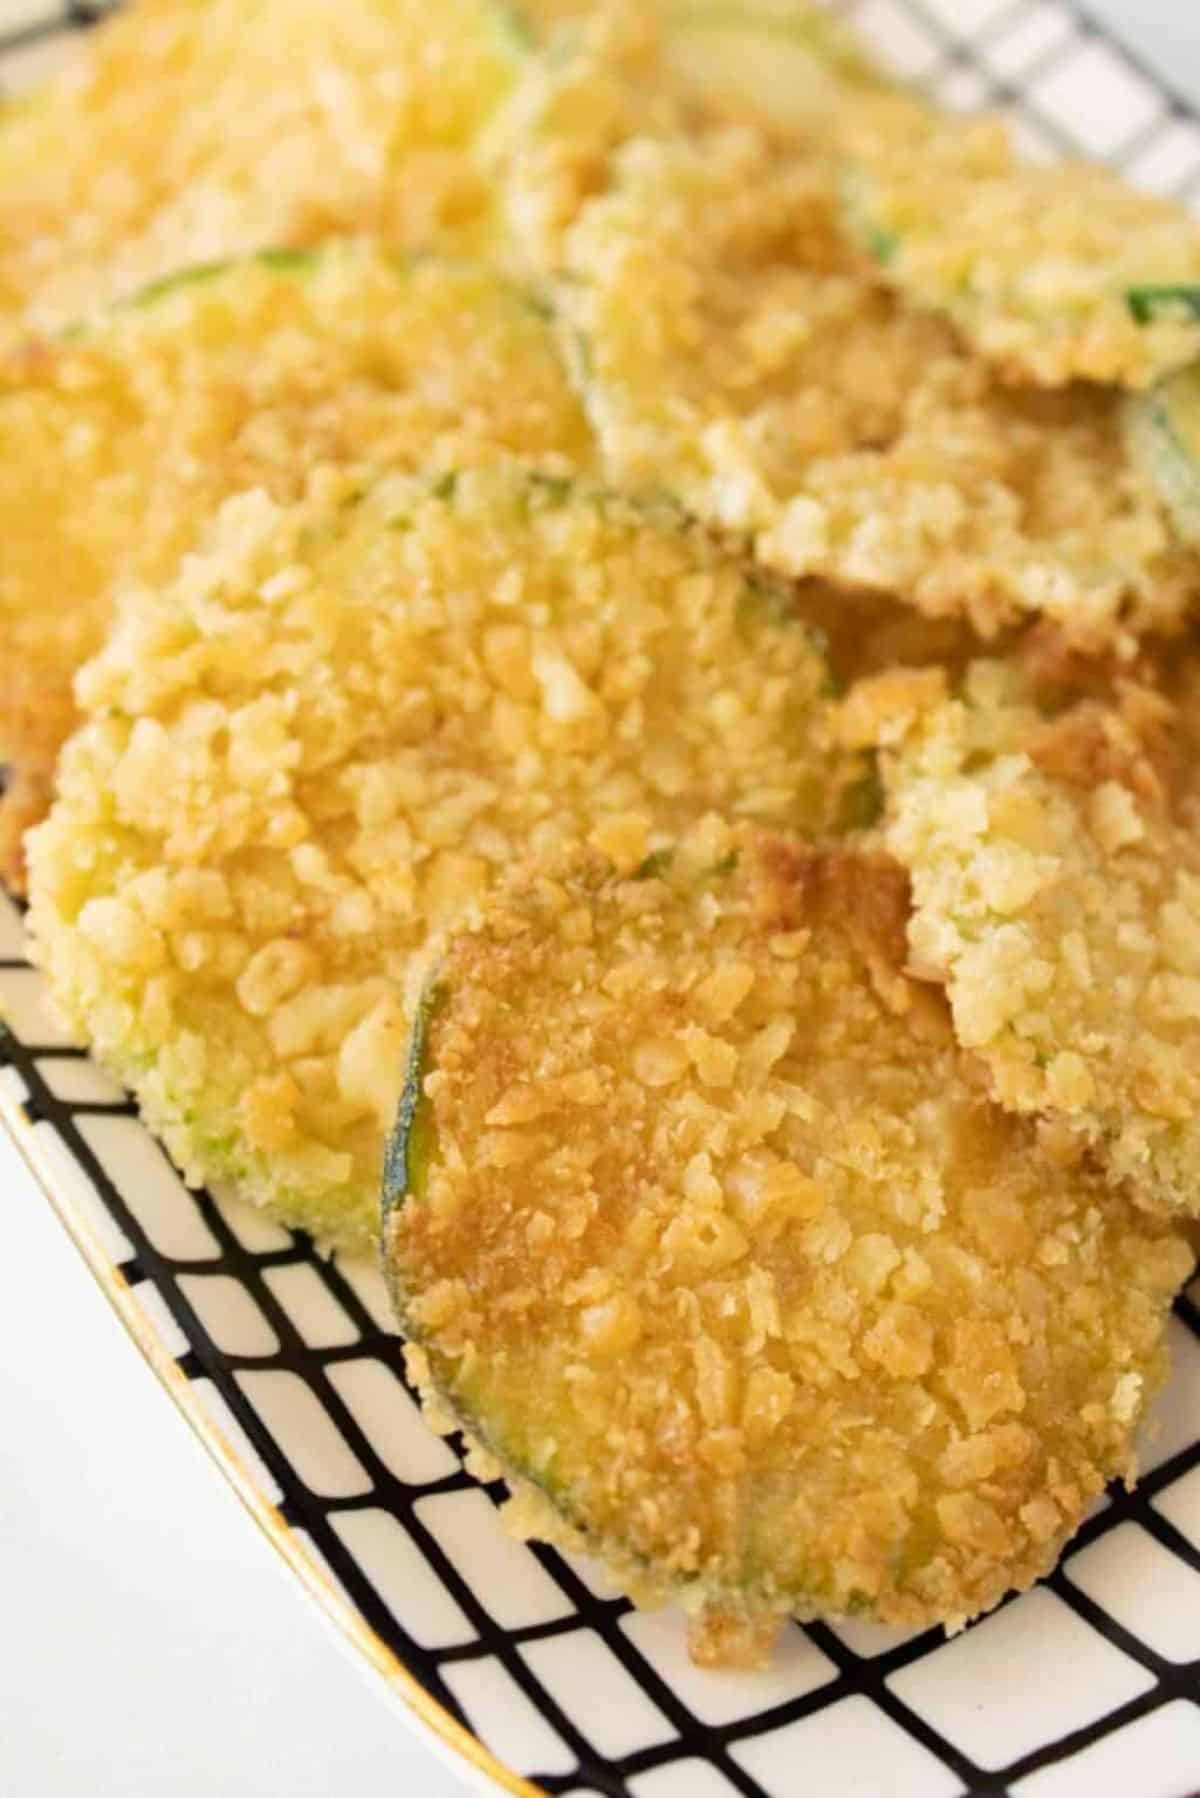 Fried Zucchini Chips on a decorative tray.